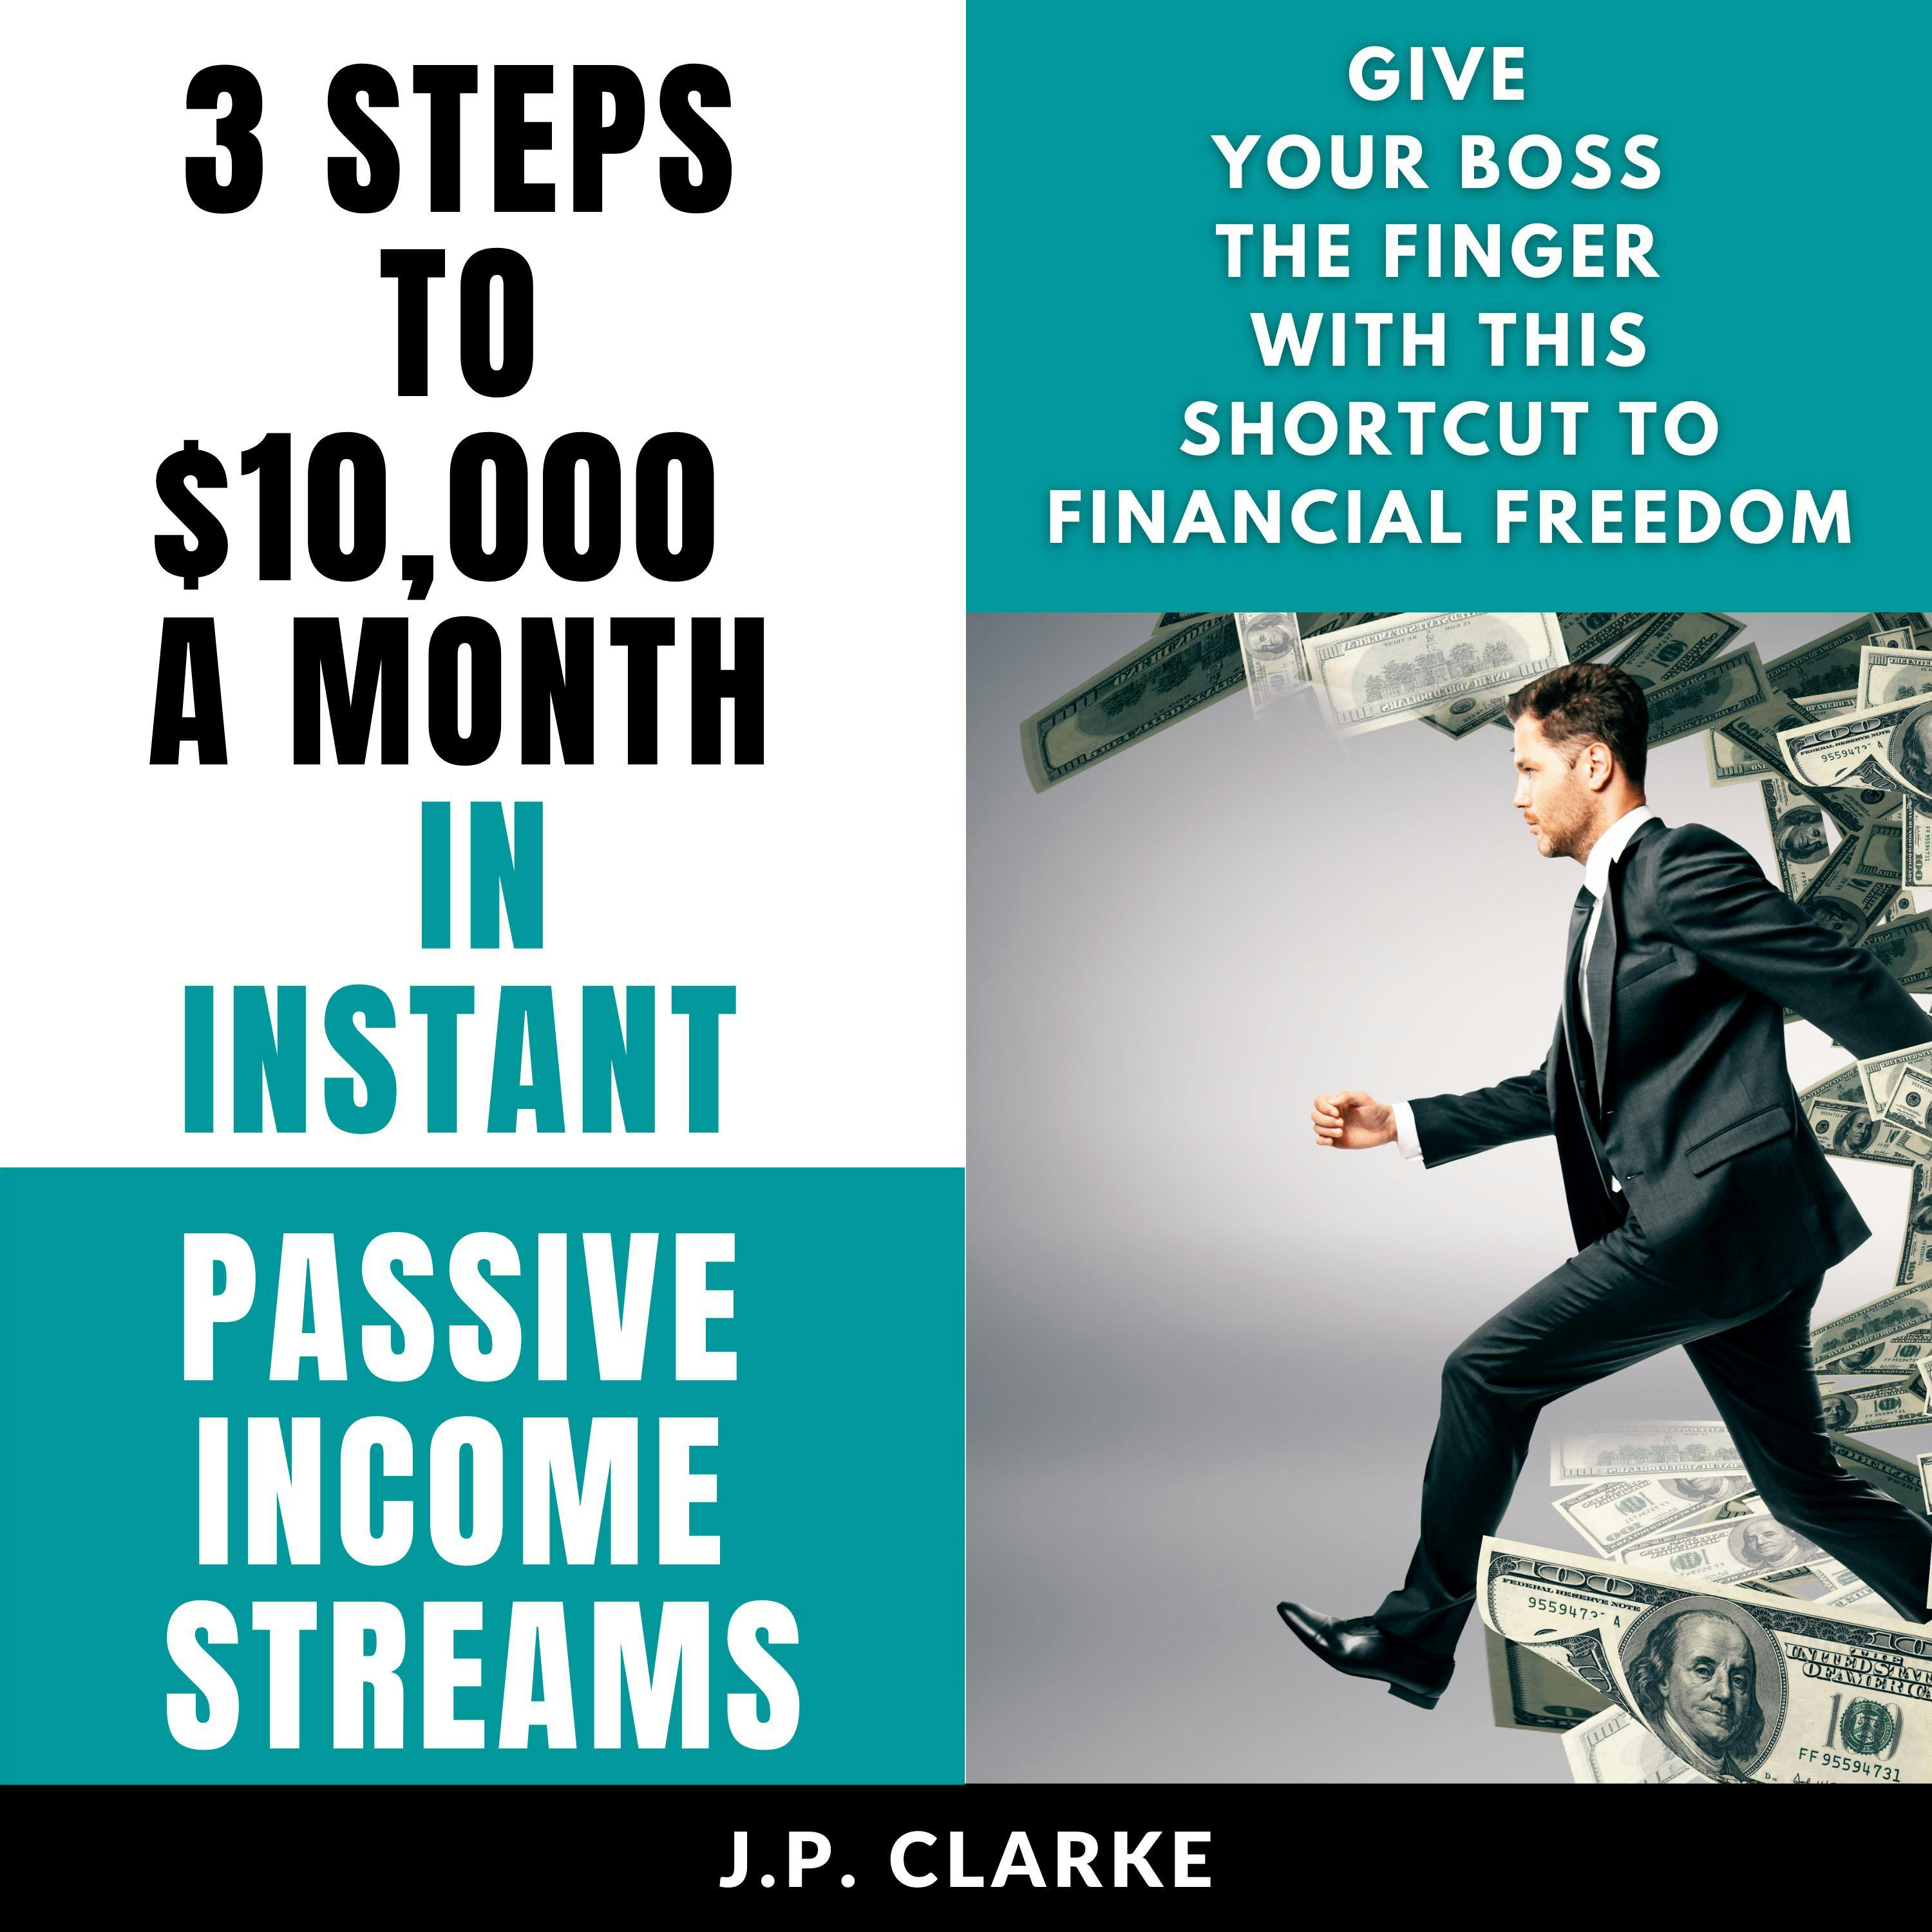 3 Steps to $10,000 a Month in Instant Passive Income Streams: Give your boss the finger with this shortcut to financial freedom - J.P. Clarke